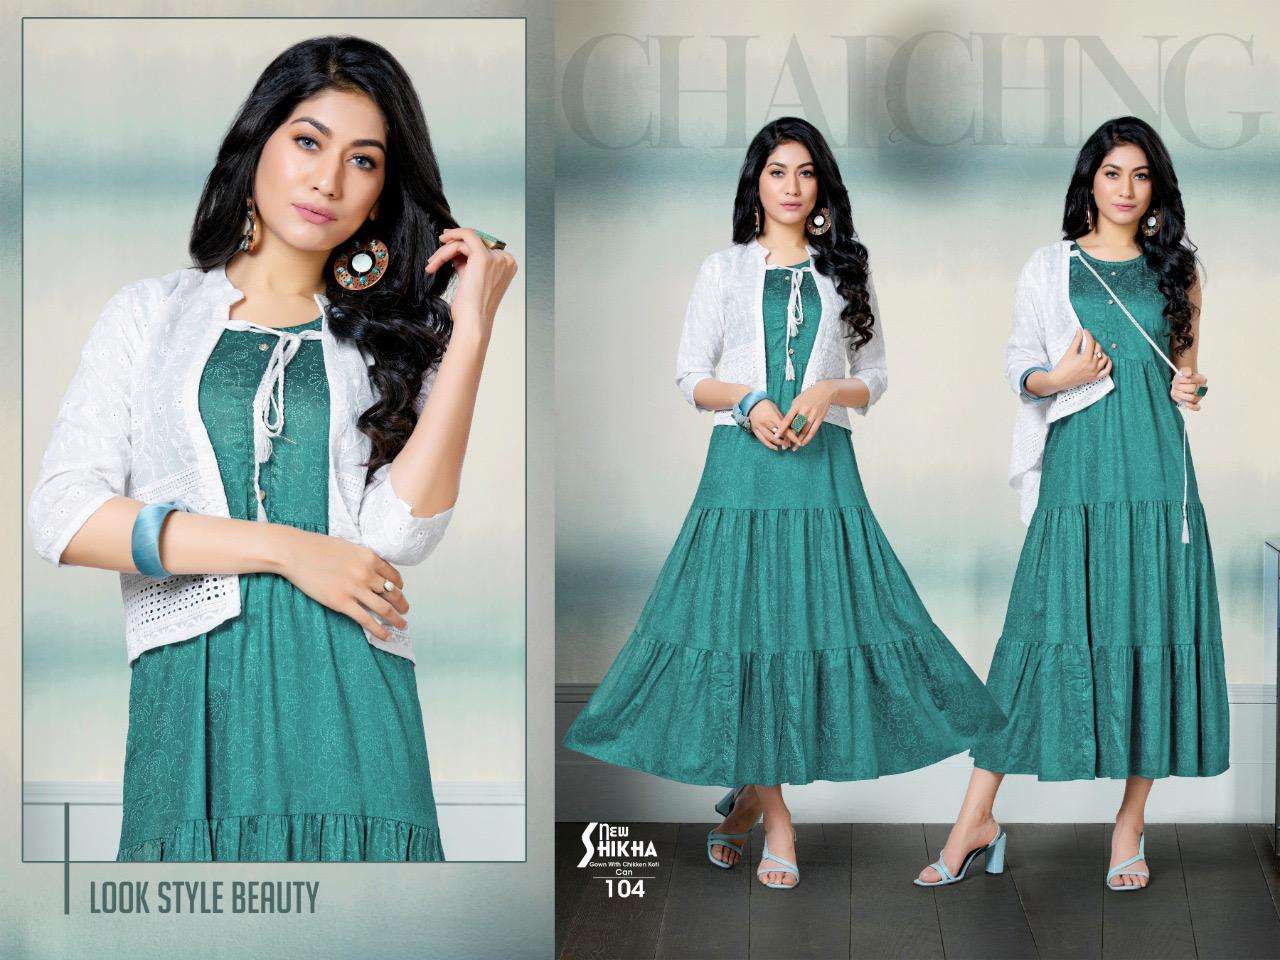 NEW SHIKHA BY BEAUTY QUEEN 101 TO 108 SERIES DESIGNER STYLISH FANCY COLORFUL BEAUTIFUL PARTY WEAR & ETHNIC WEAR COLLECTION RAYON KURTIS WITH JACKETS AT WHOLESALE PRICE